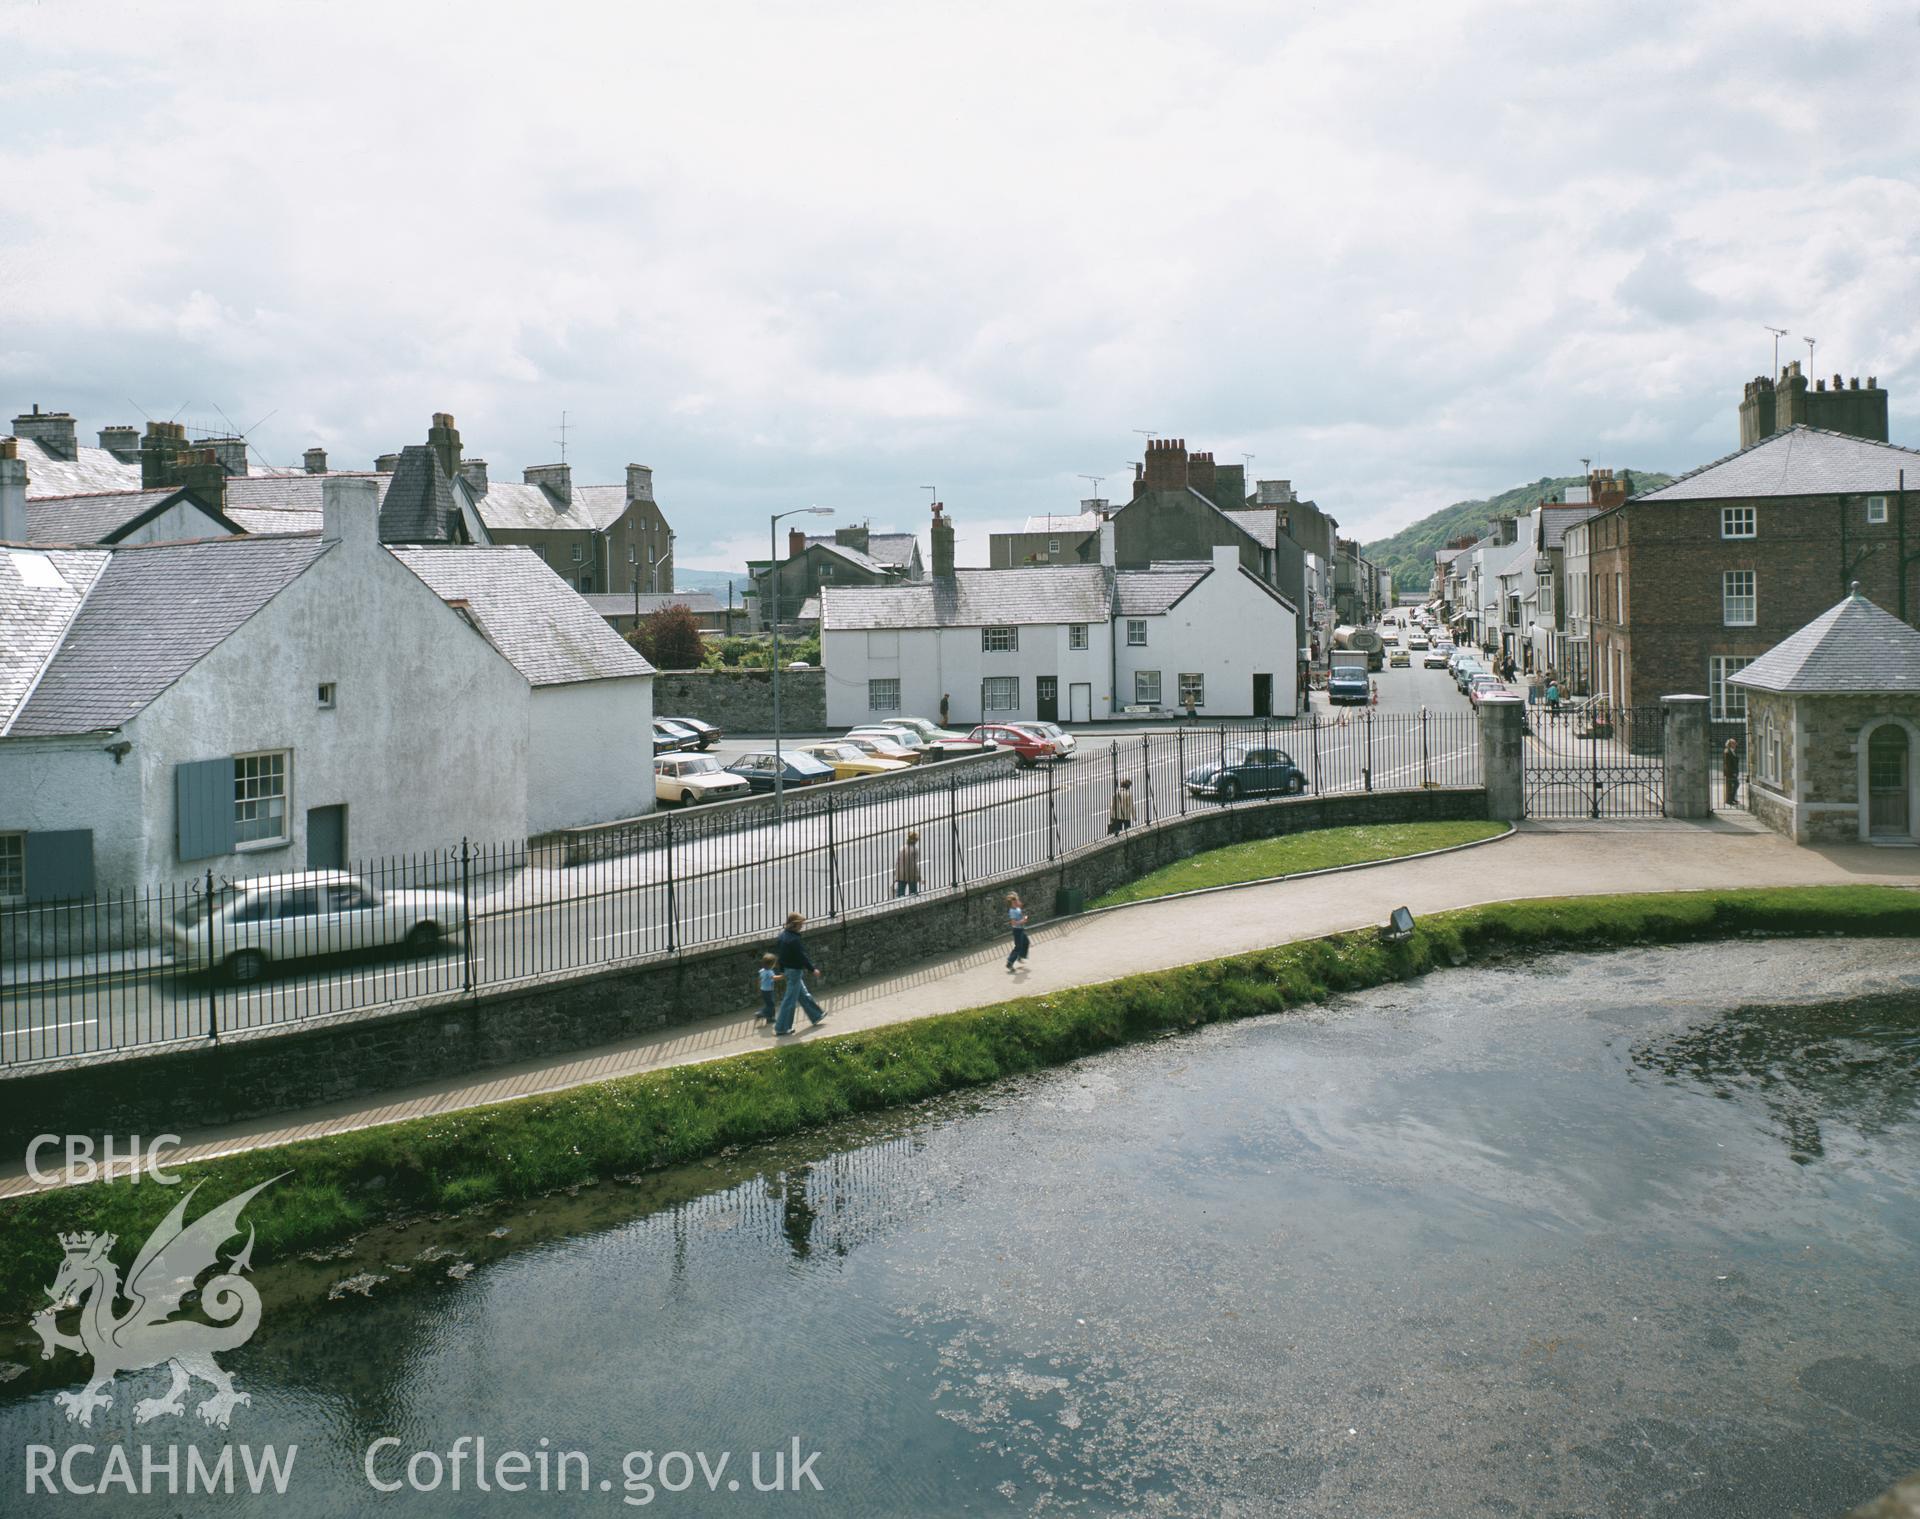 RCAHMW colour transparency showing Beaumaris Town taken by I.N. Wright, 1979